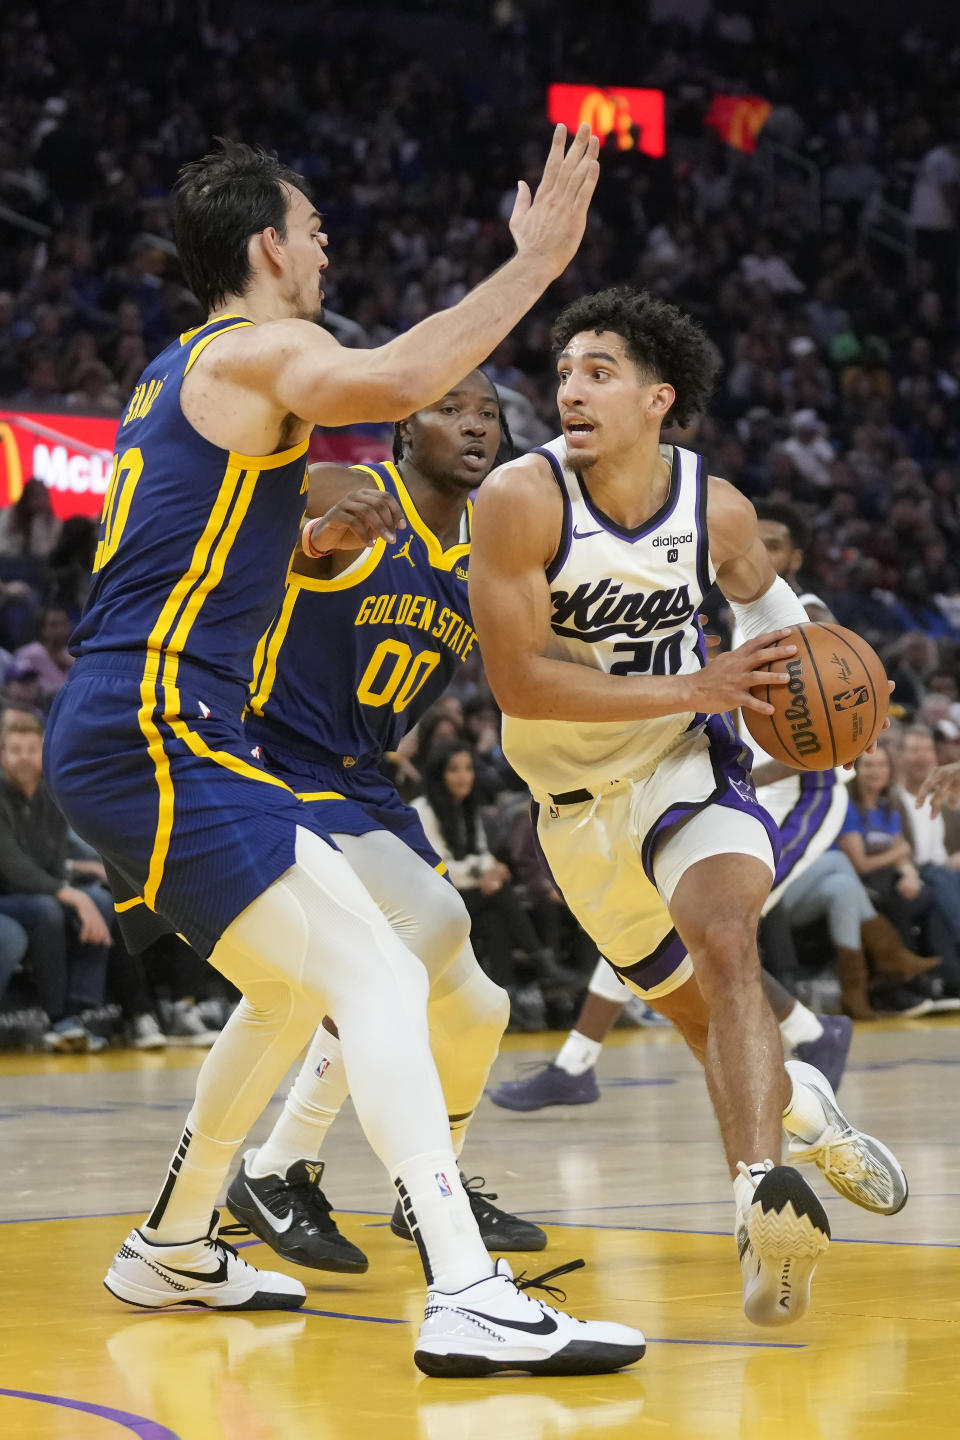 Sacramento Kings guard Colby Jones, right, drives to the basket against Golden State Warriors forward Dario Saric, left, and forward Jonathan Kuminga (00) during the first half of an NBA basketball game in San Francisco, Wednesday, Nov. 1, 2023. (AP Photo/Jeff Chiu)